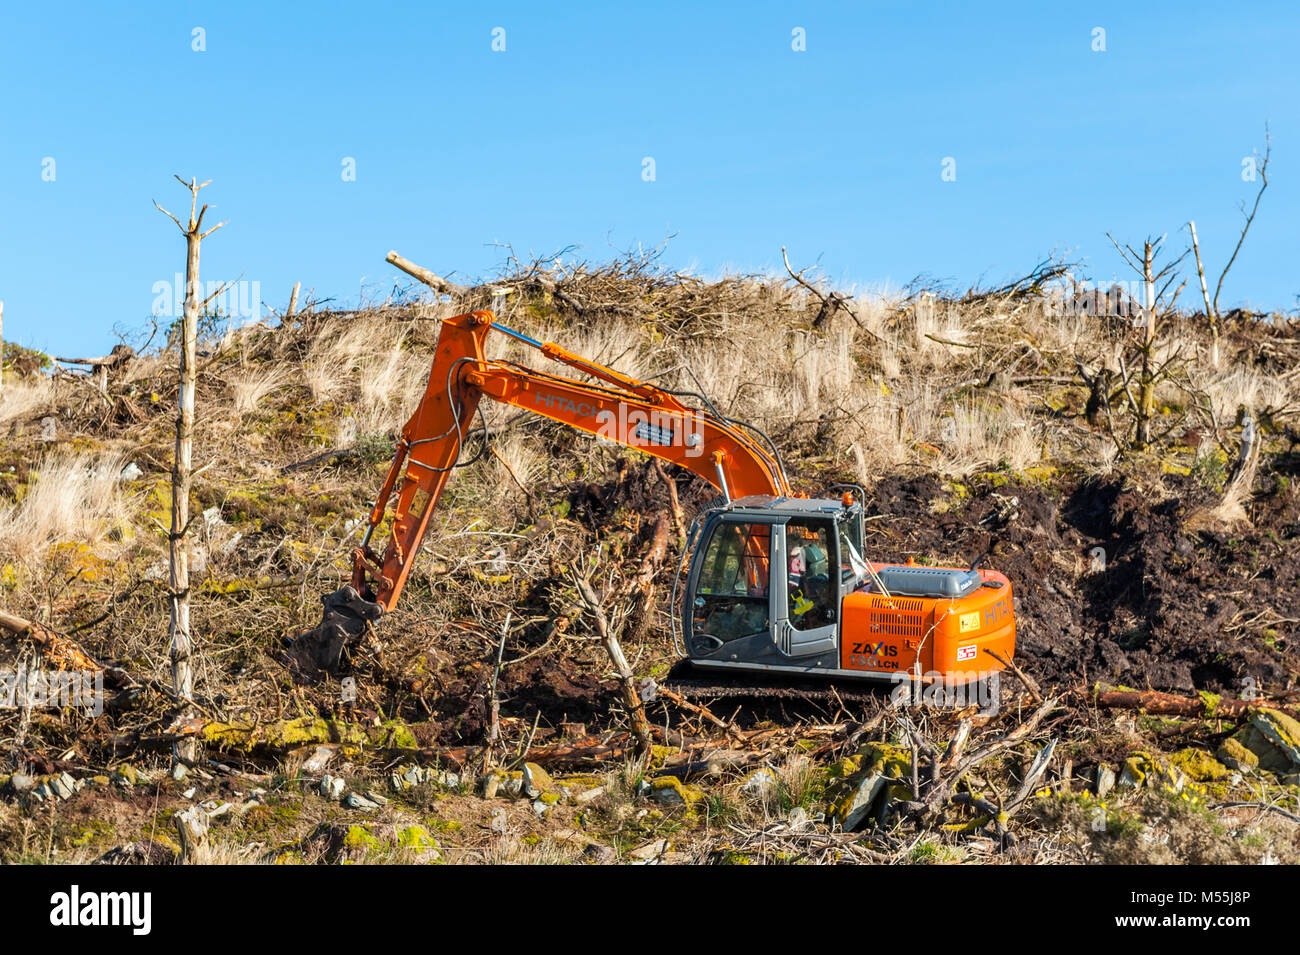 Ballydehob, Ireland. 20th Feb, 2018. Coillte owned Scrahanaleara Forest was harvested in 2015. In preparation for the forest to be replanted next week, an Hitachi 130 tracked excavator clears the remnants of the old forest. Credit: Andy Gibson/Alamy Live News. Stock Photo